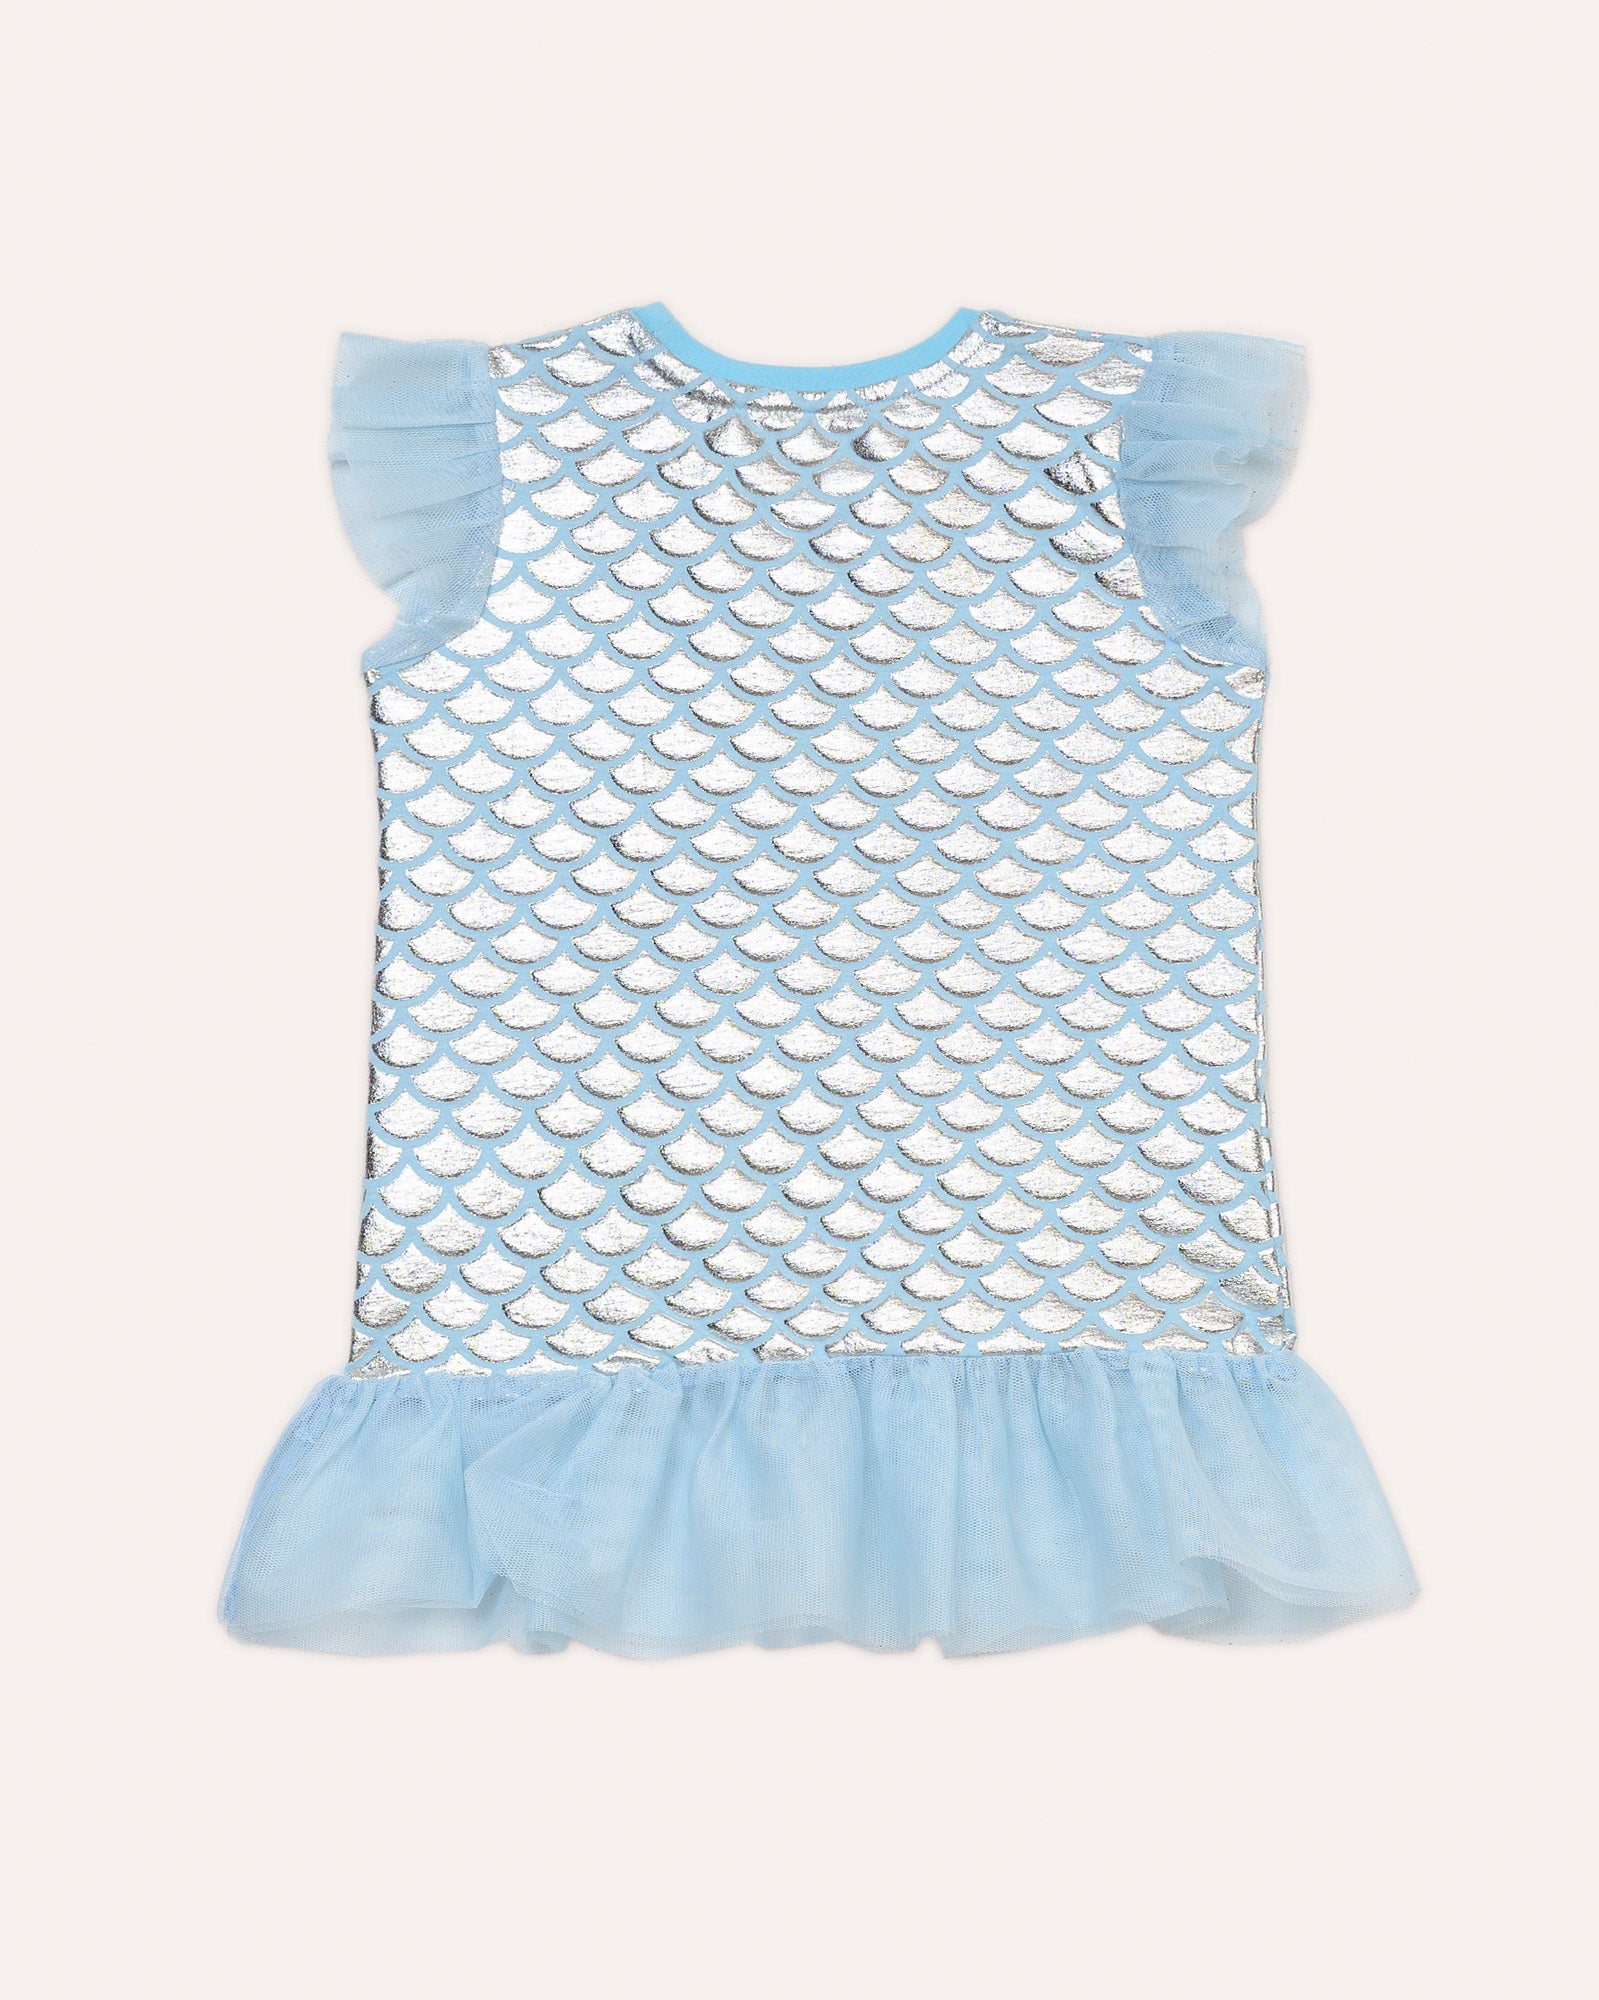 Knit-Top For GIRLS - ENGINE